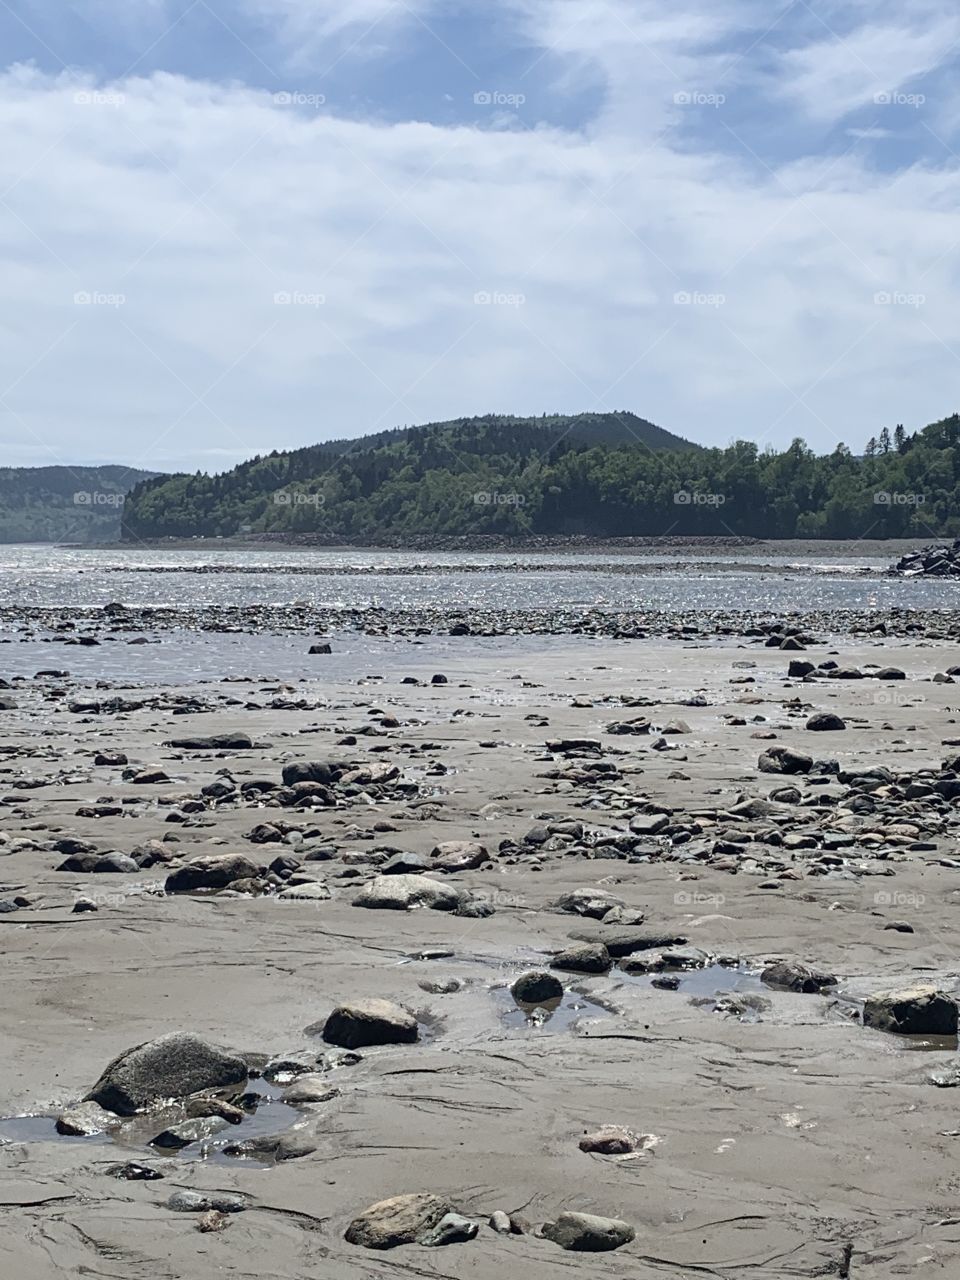 Walk the ocean floor in Alma, New Brunswick at the Bay of Fundy in the Fundy National Park. Discover the secrets that lie beneath the ocean.